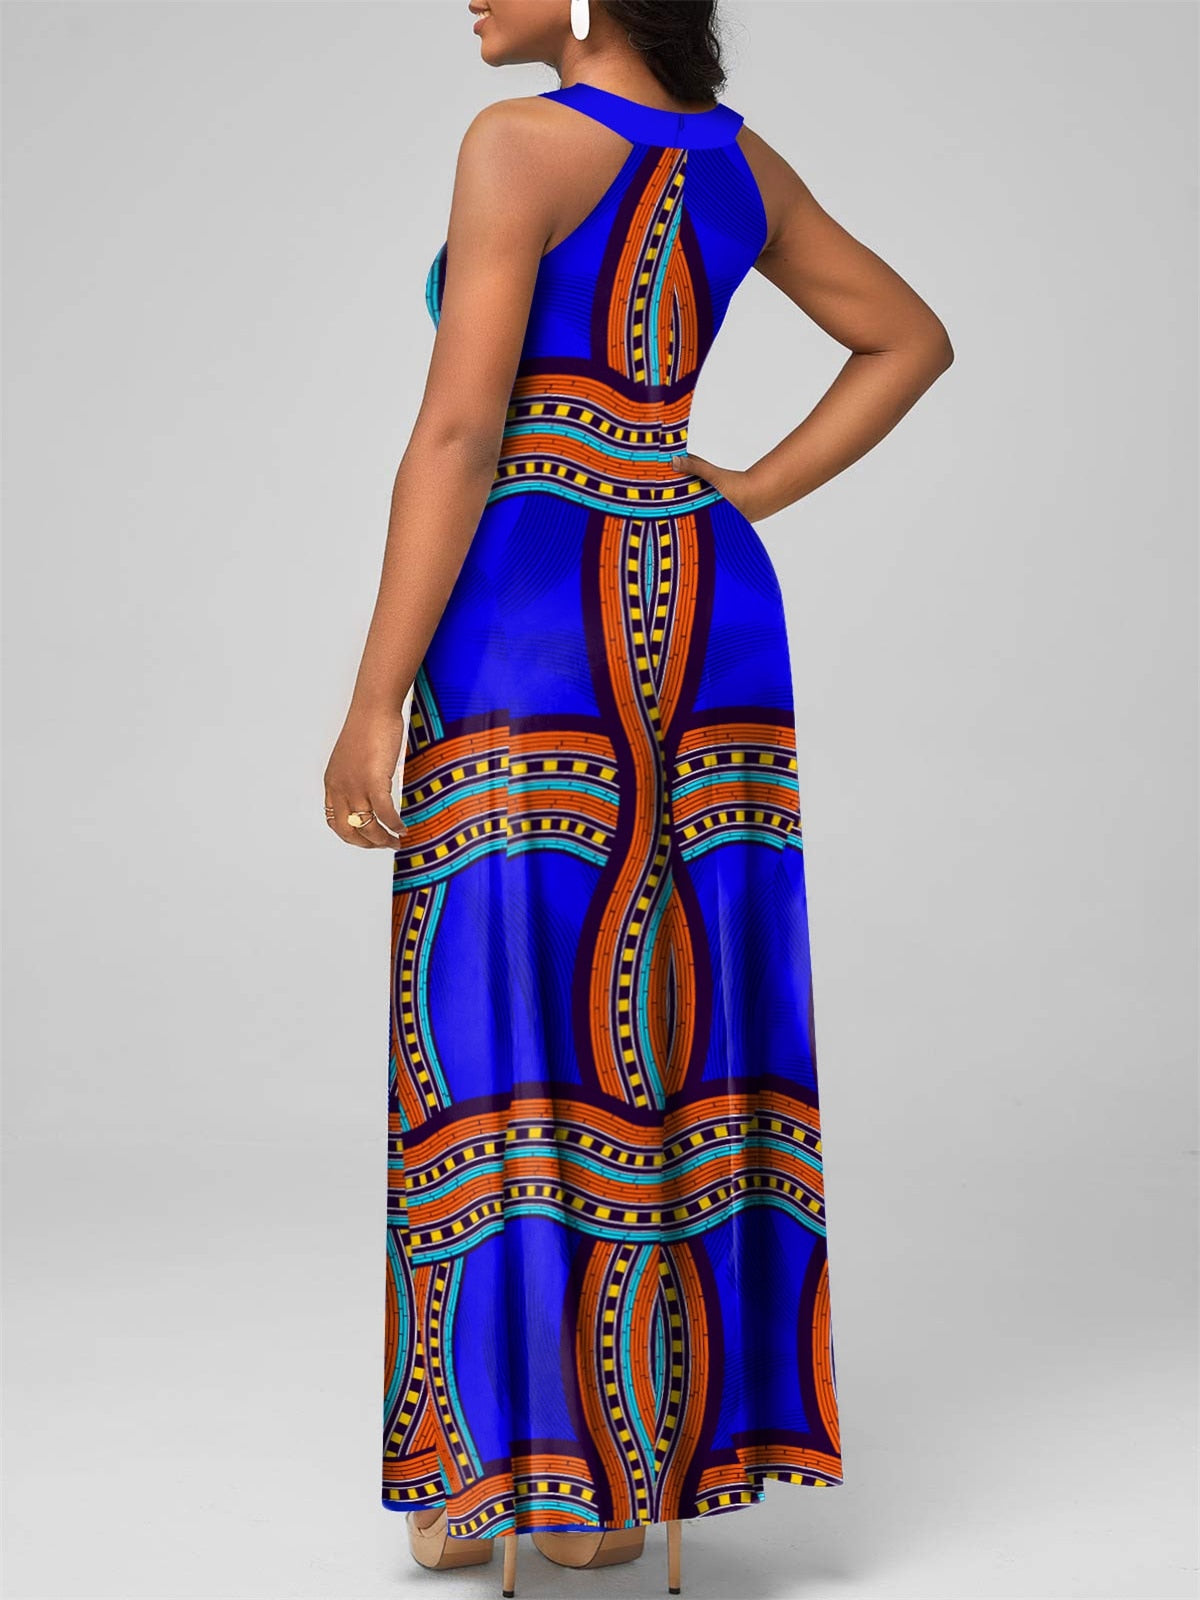 Ethnic Chic: Geometric Print Halter Neck Maxi Dress with Striped Cut-Out Design - Flexi Africa - Flexi Africa offers Free Delivery Worldwide - Vibrant African traditional clothing showcasing bold prints and intricate designs